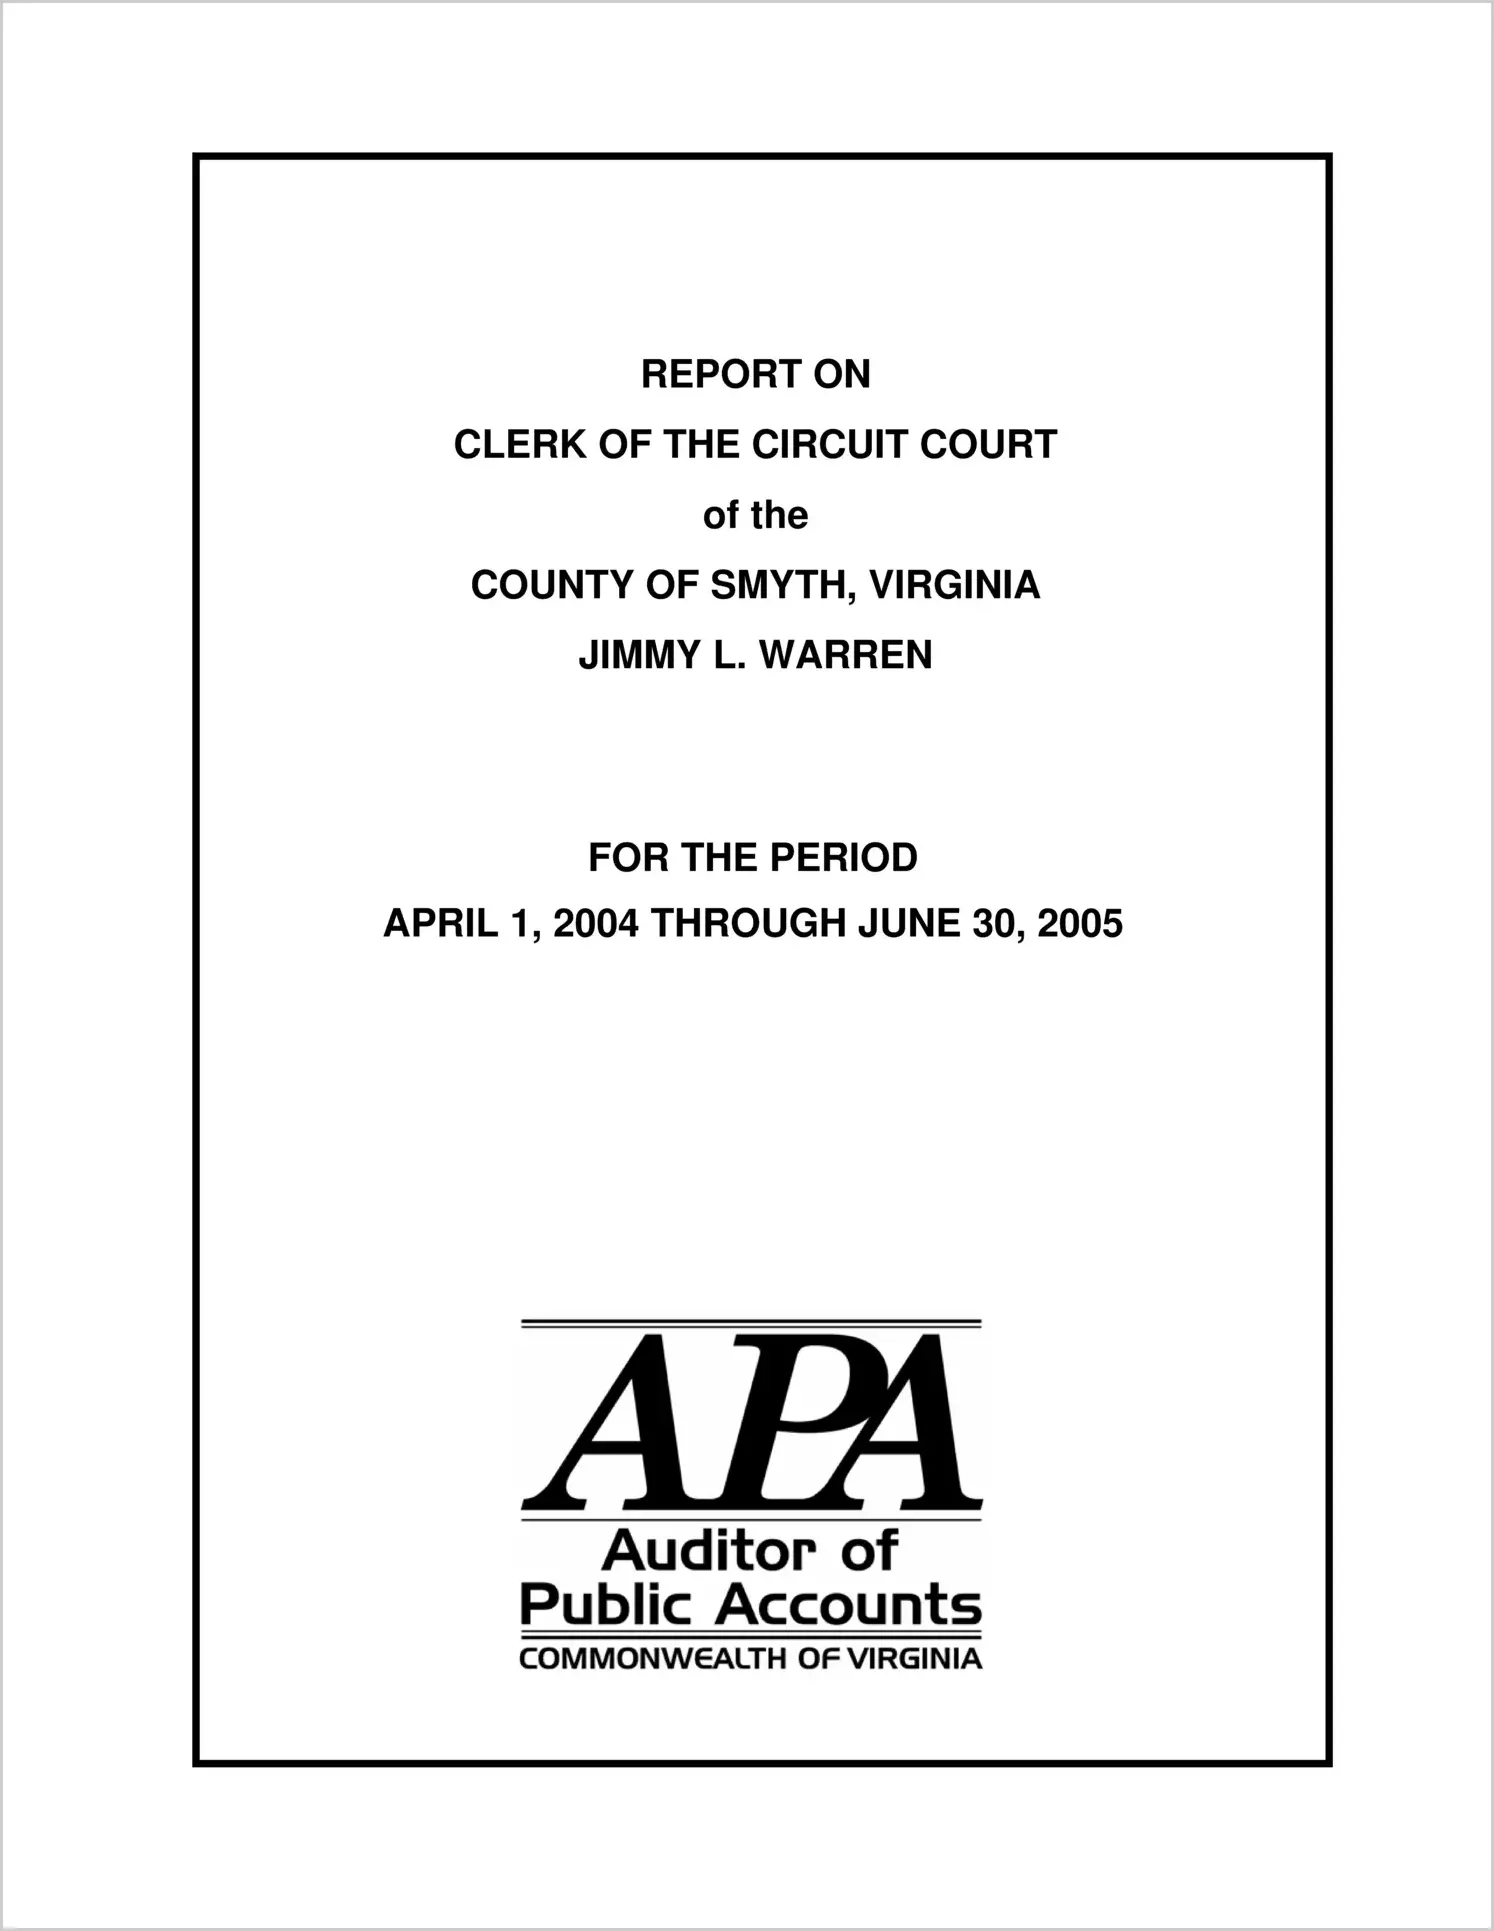 Clerk of the Circuit Court of the County of Smyth for the period April 1, 2004 through June 30, 2005